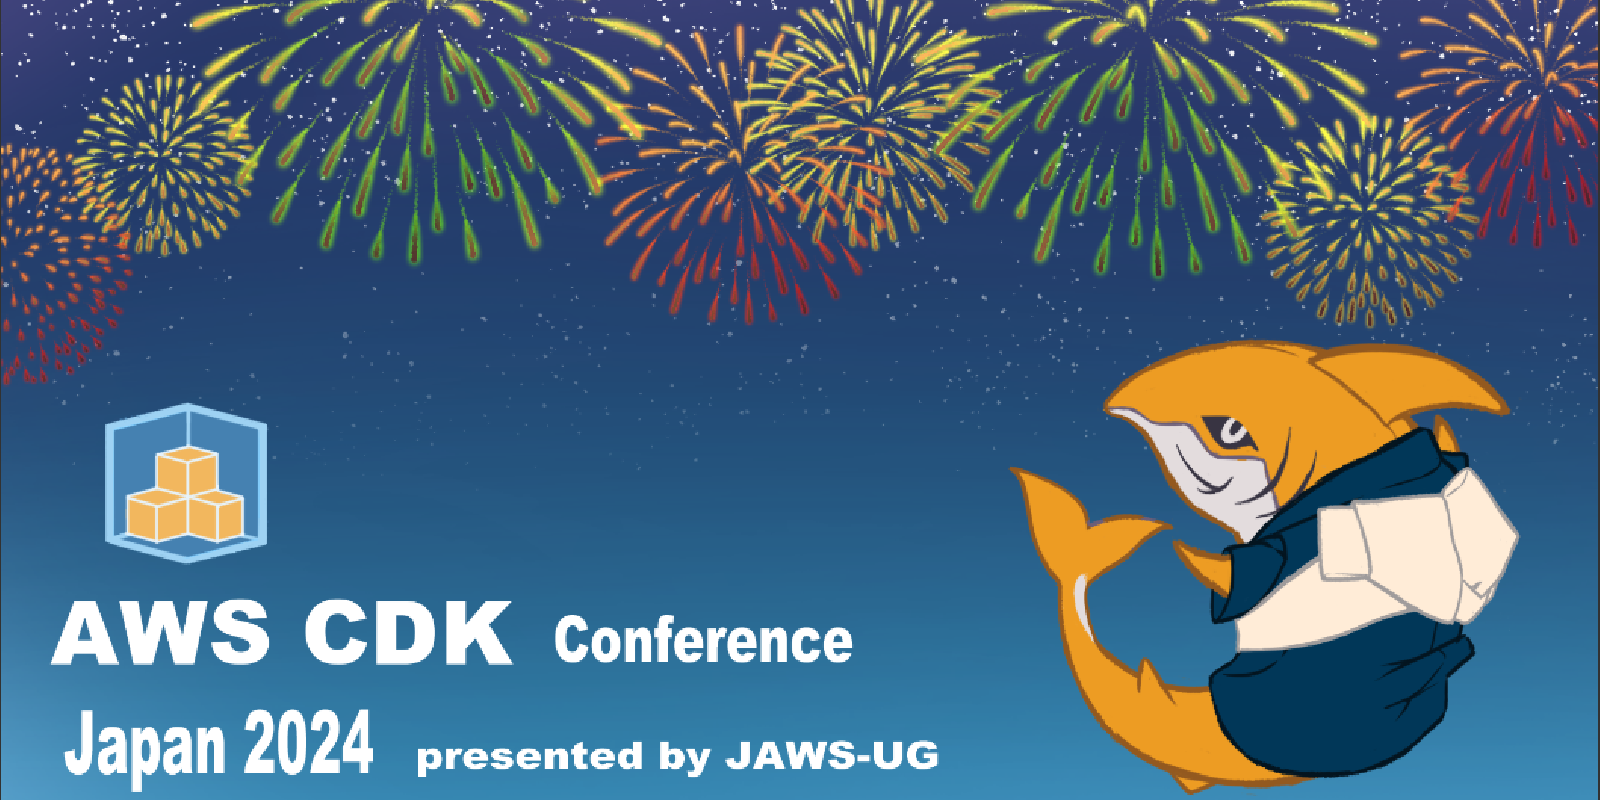 AWS CDK Conference Japan 2024 presented by JAWS-UG banner